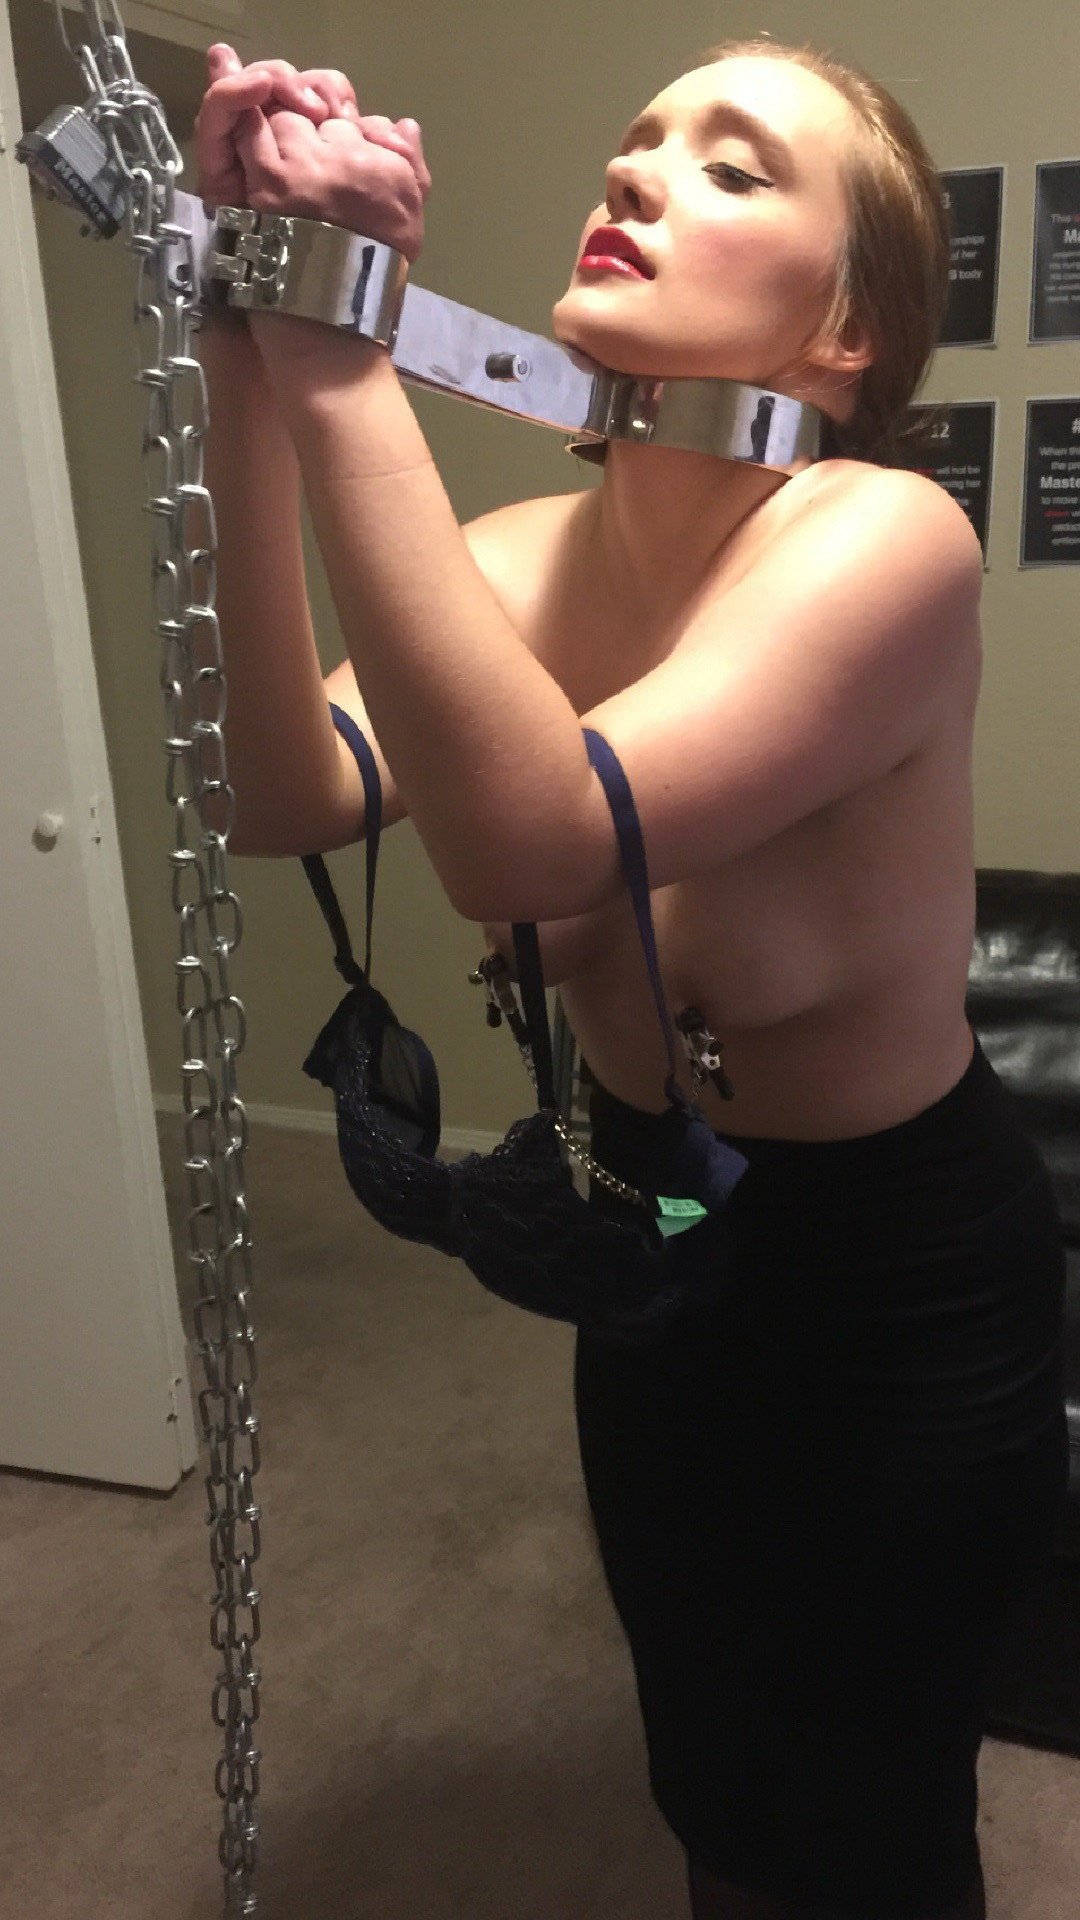 Steel restraints and clamps